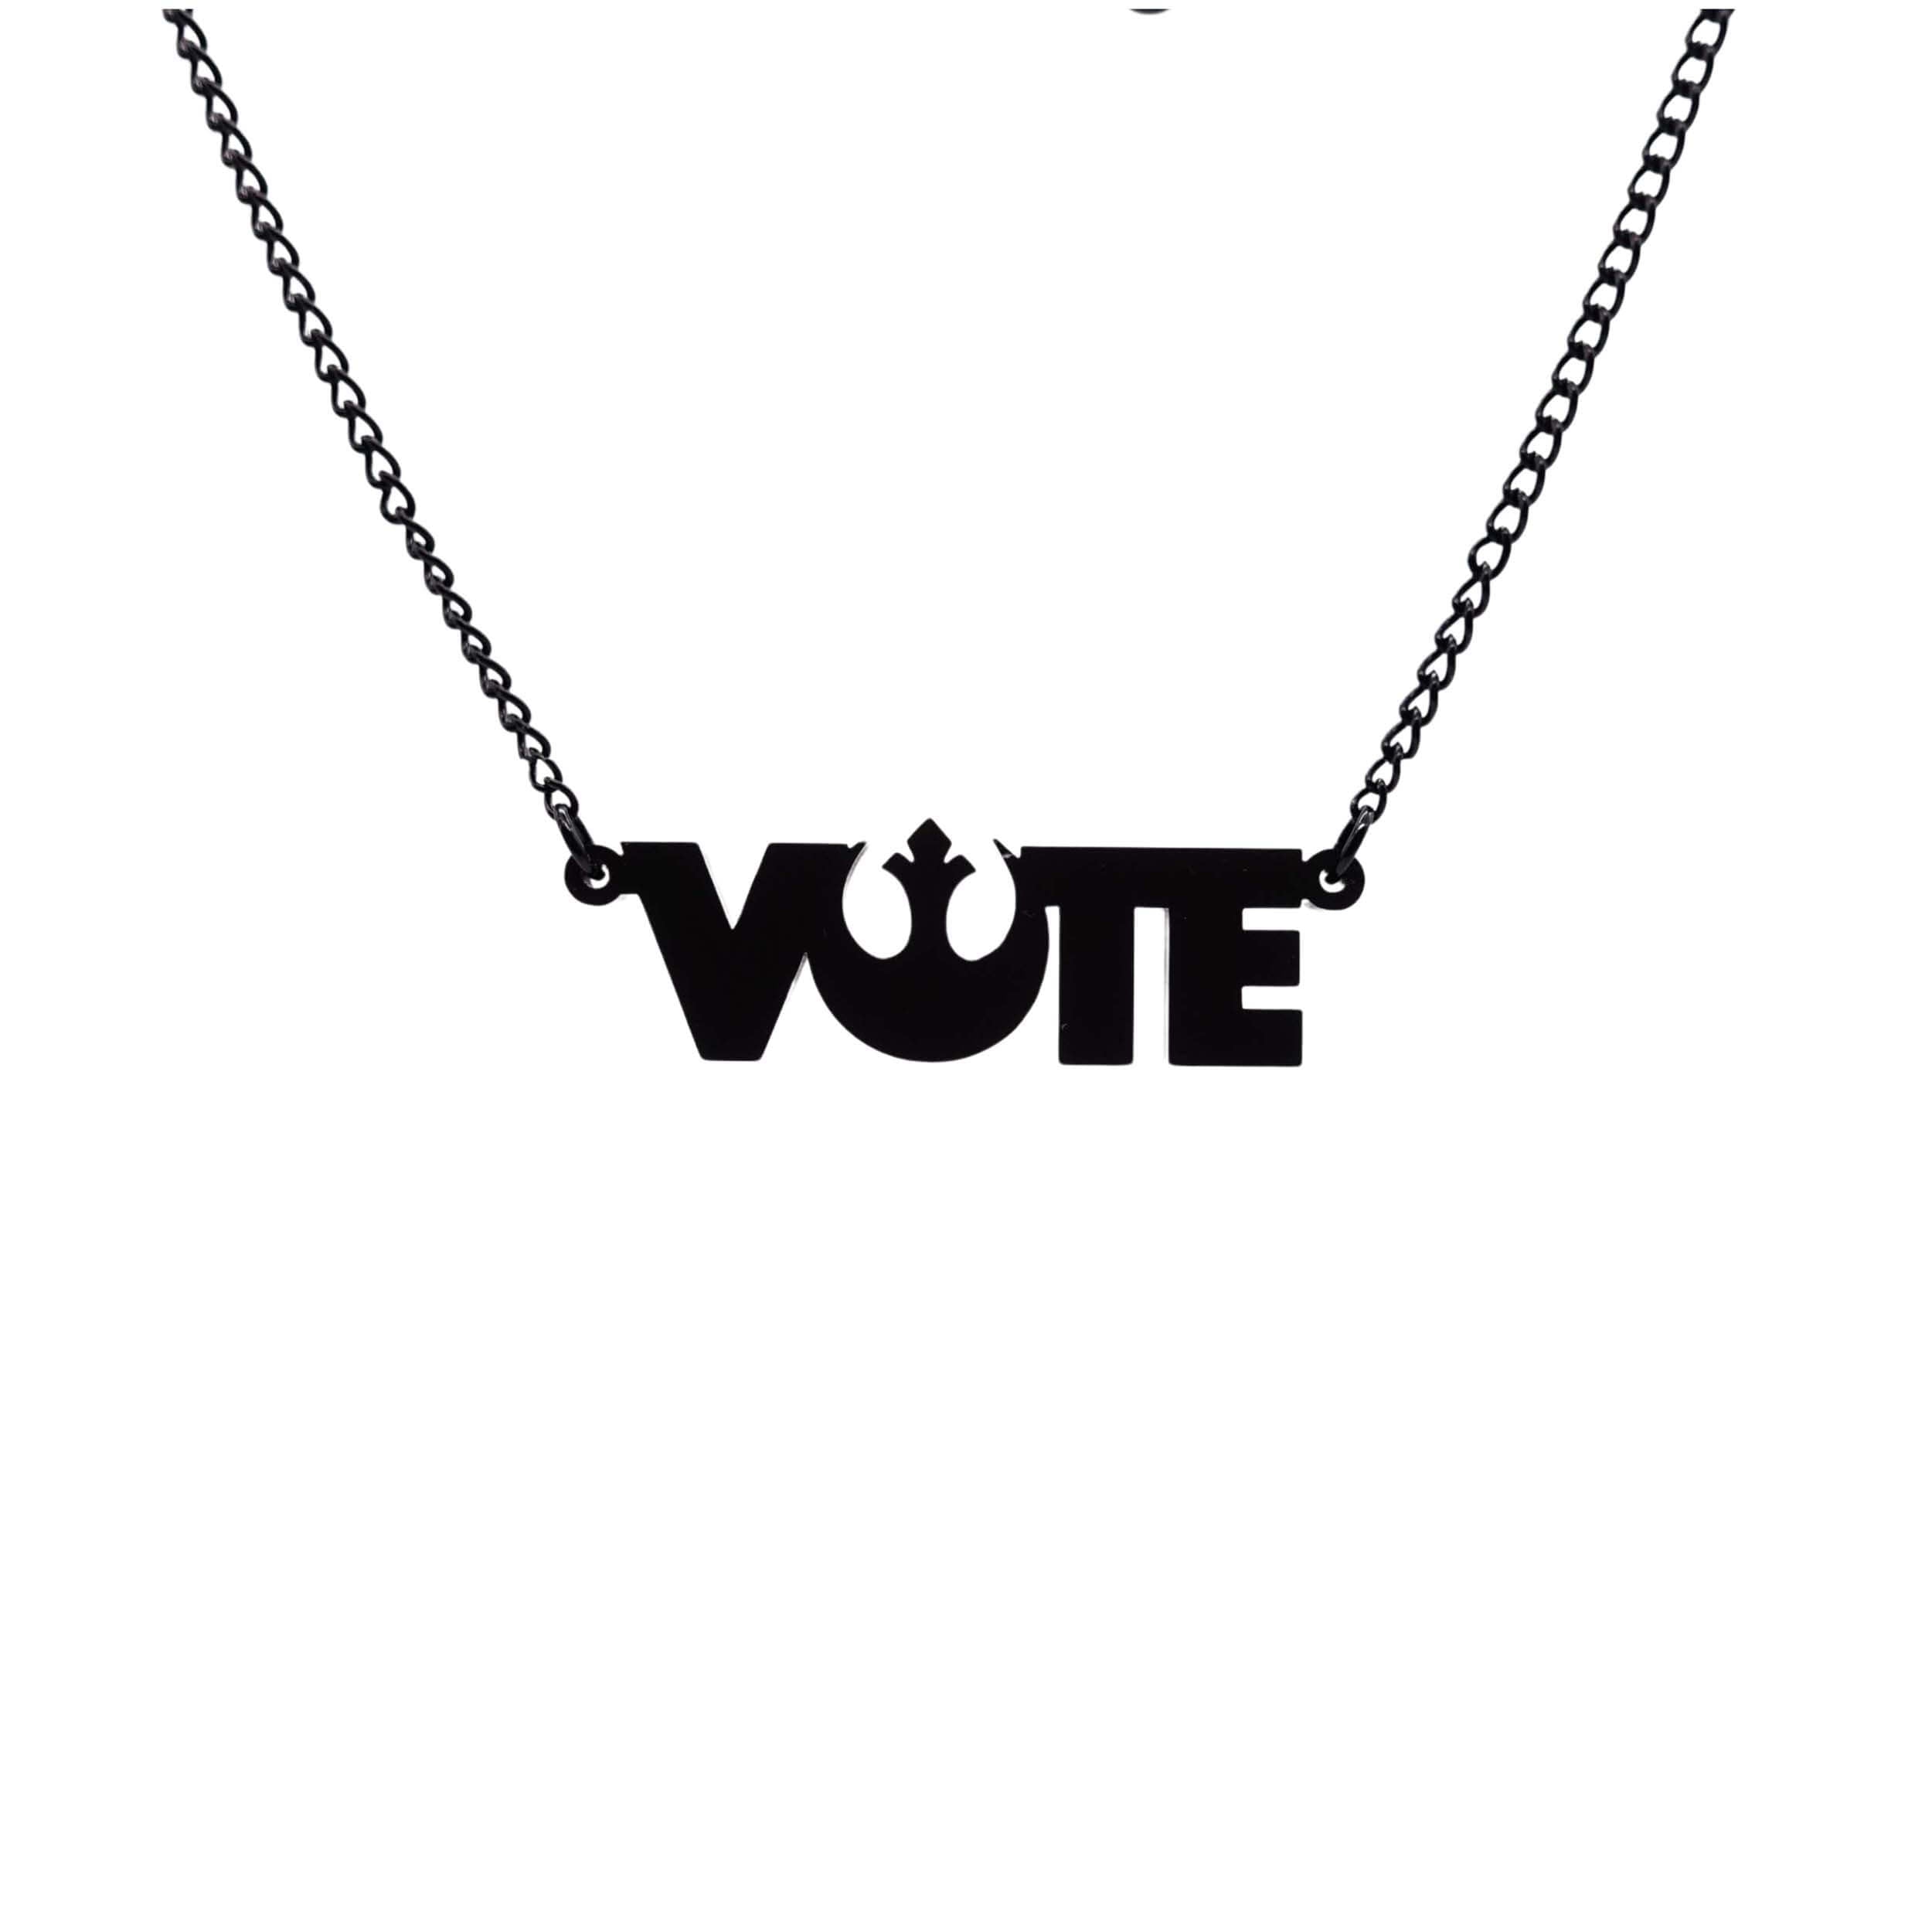 Rebel Alliance Vote necklace in matte black shown hanging against a white background. 